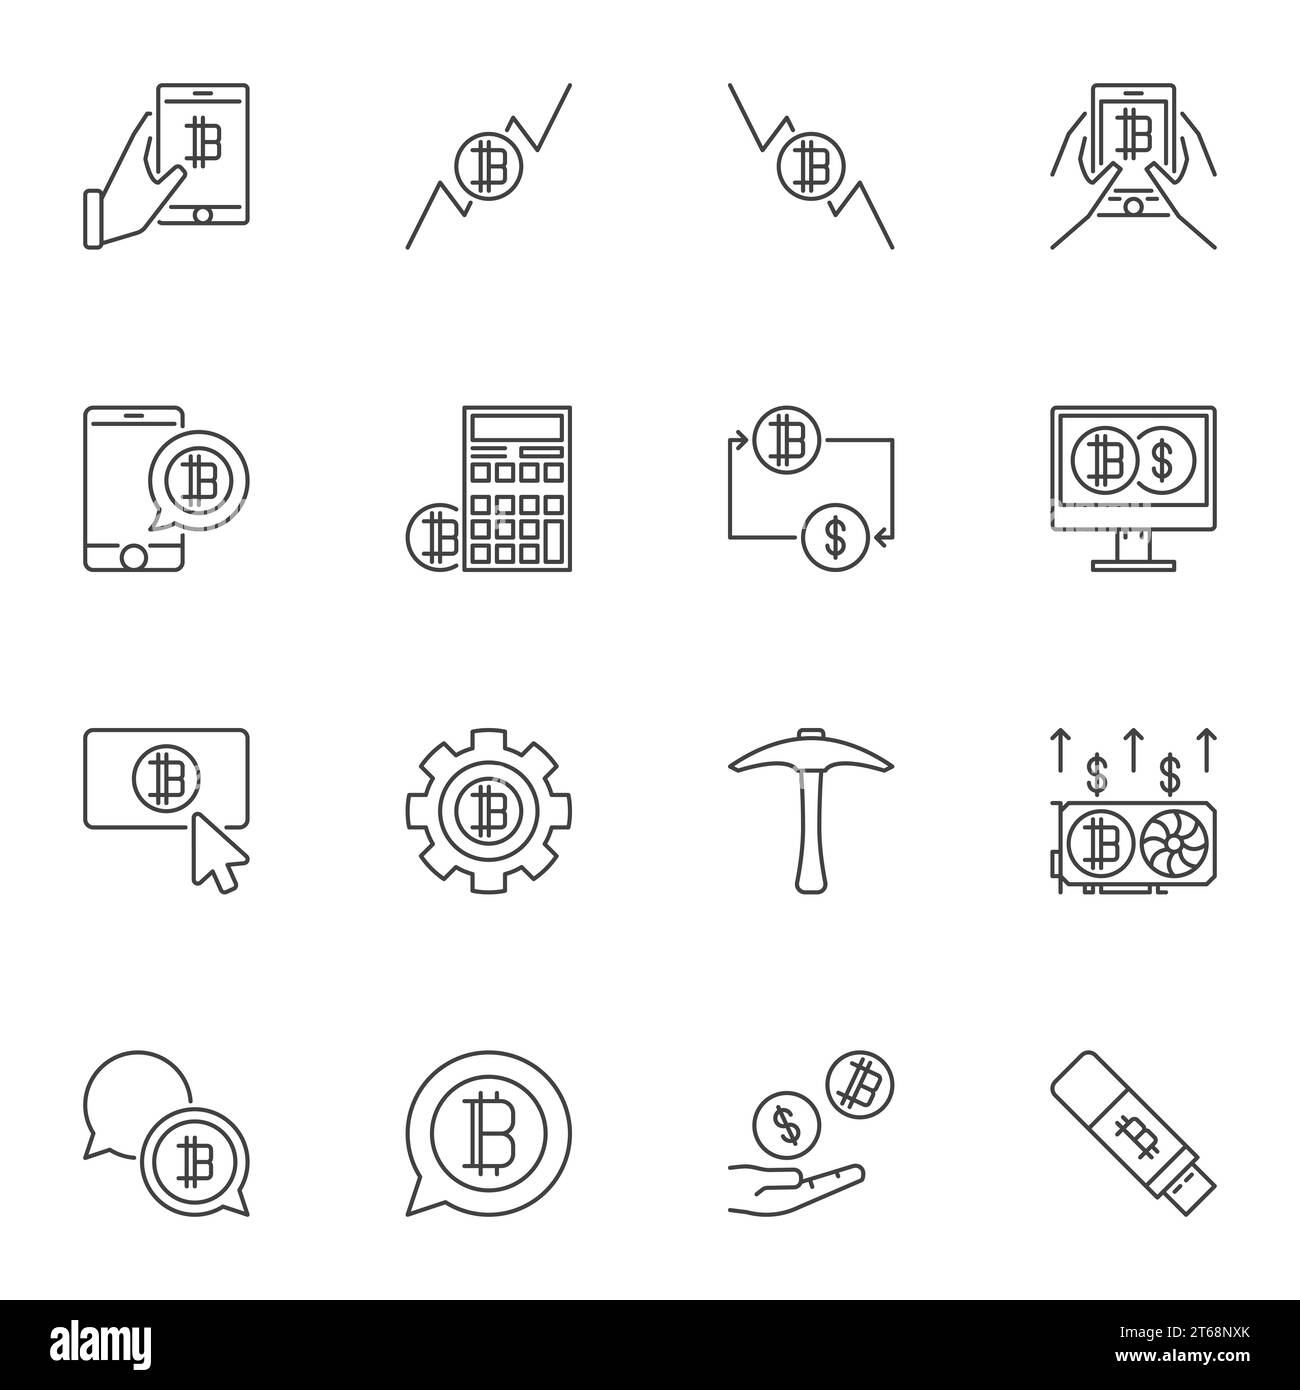 Vector Blockchain concept icons set in thin line style on white background Stock Vector